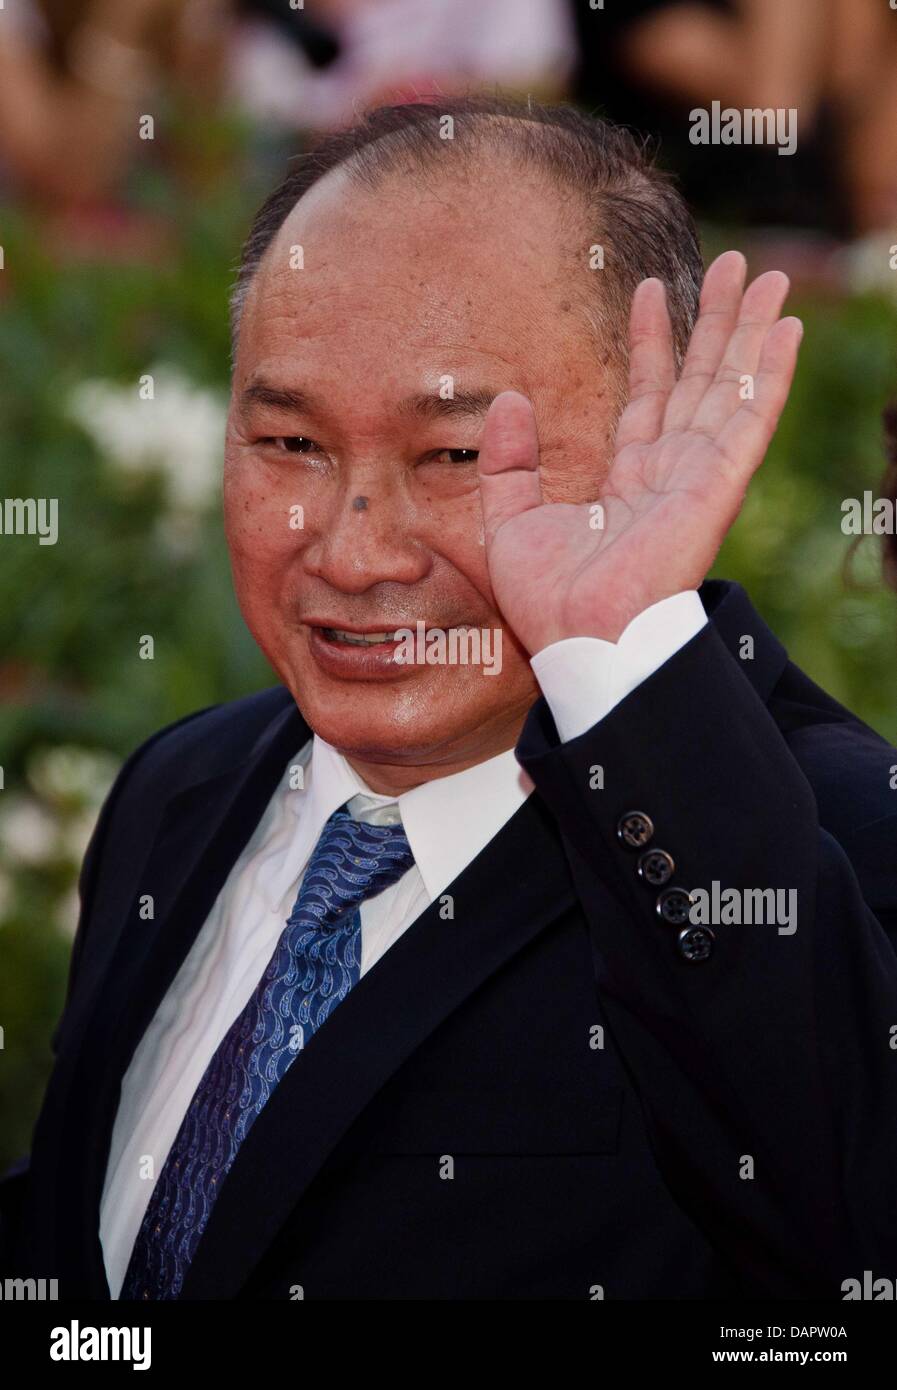 Director John Woo arrives at the premiere of 'The Ides Of March' during the 68th Venice International Film Festival at Palazzo de Cinema in Venice, Italy, 31 August 2011. Photo: Hubert Boesl Stock Photo